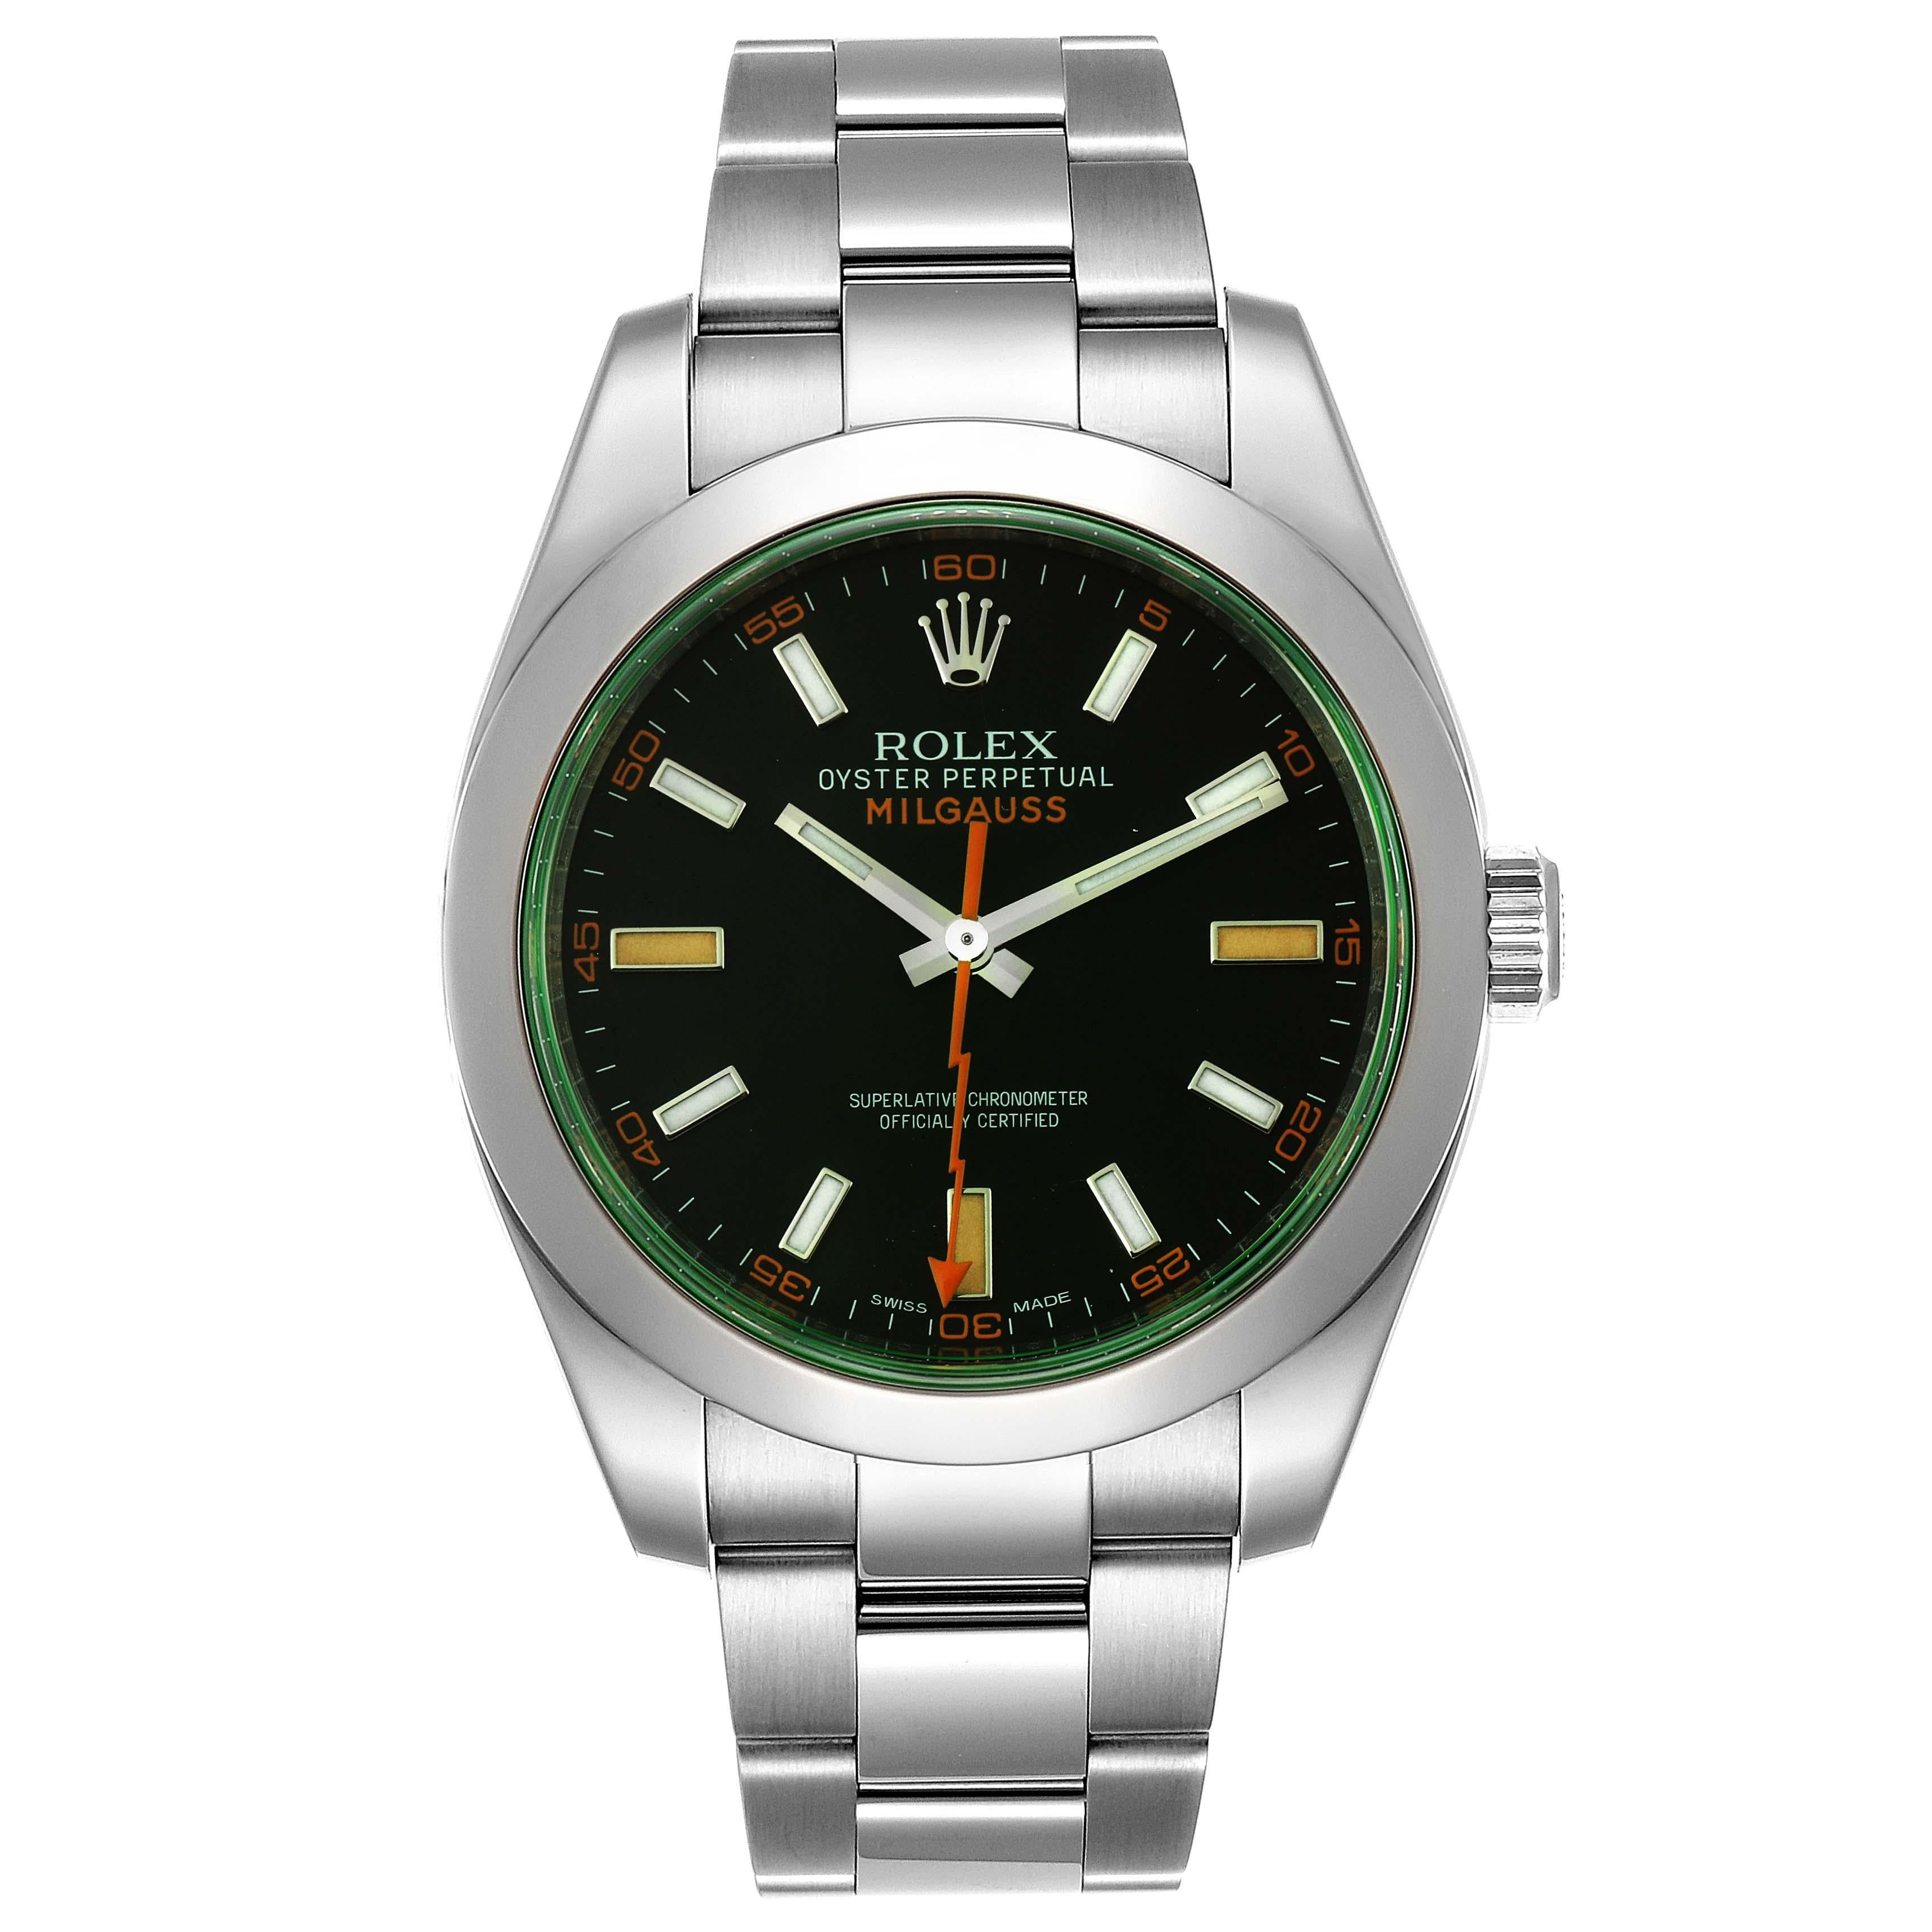 Rolex Milgauss Black Dial Green Crystal Steel Mens Watch 116400V. Officially certified chronometer self-winding movement. Stainless steel case 40.0 mm in diameter. Stainless steel fixed smooth domed bezel. Scratch resistant green sapphire crystal.